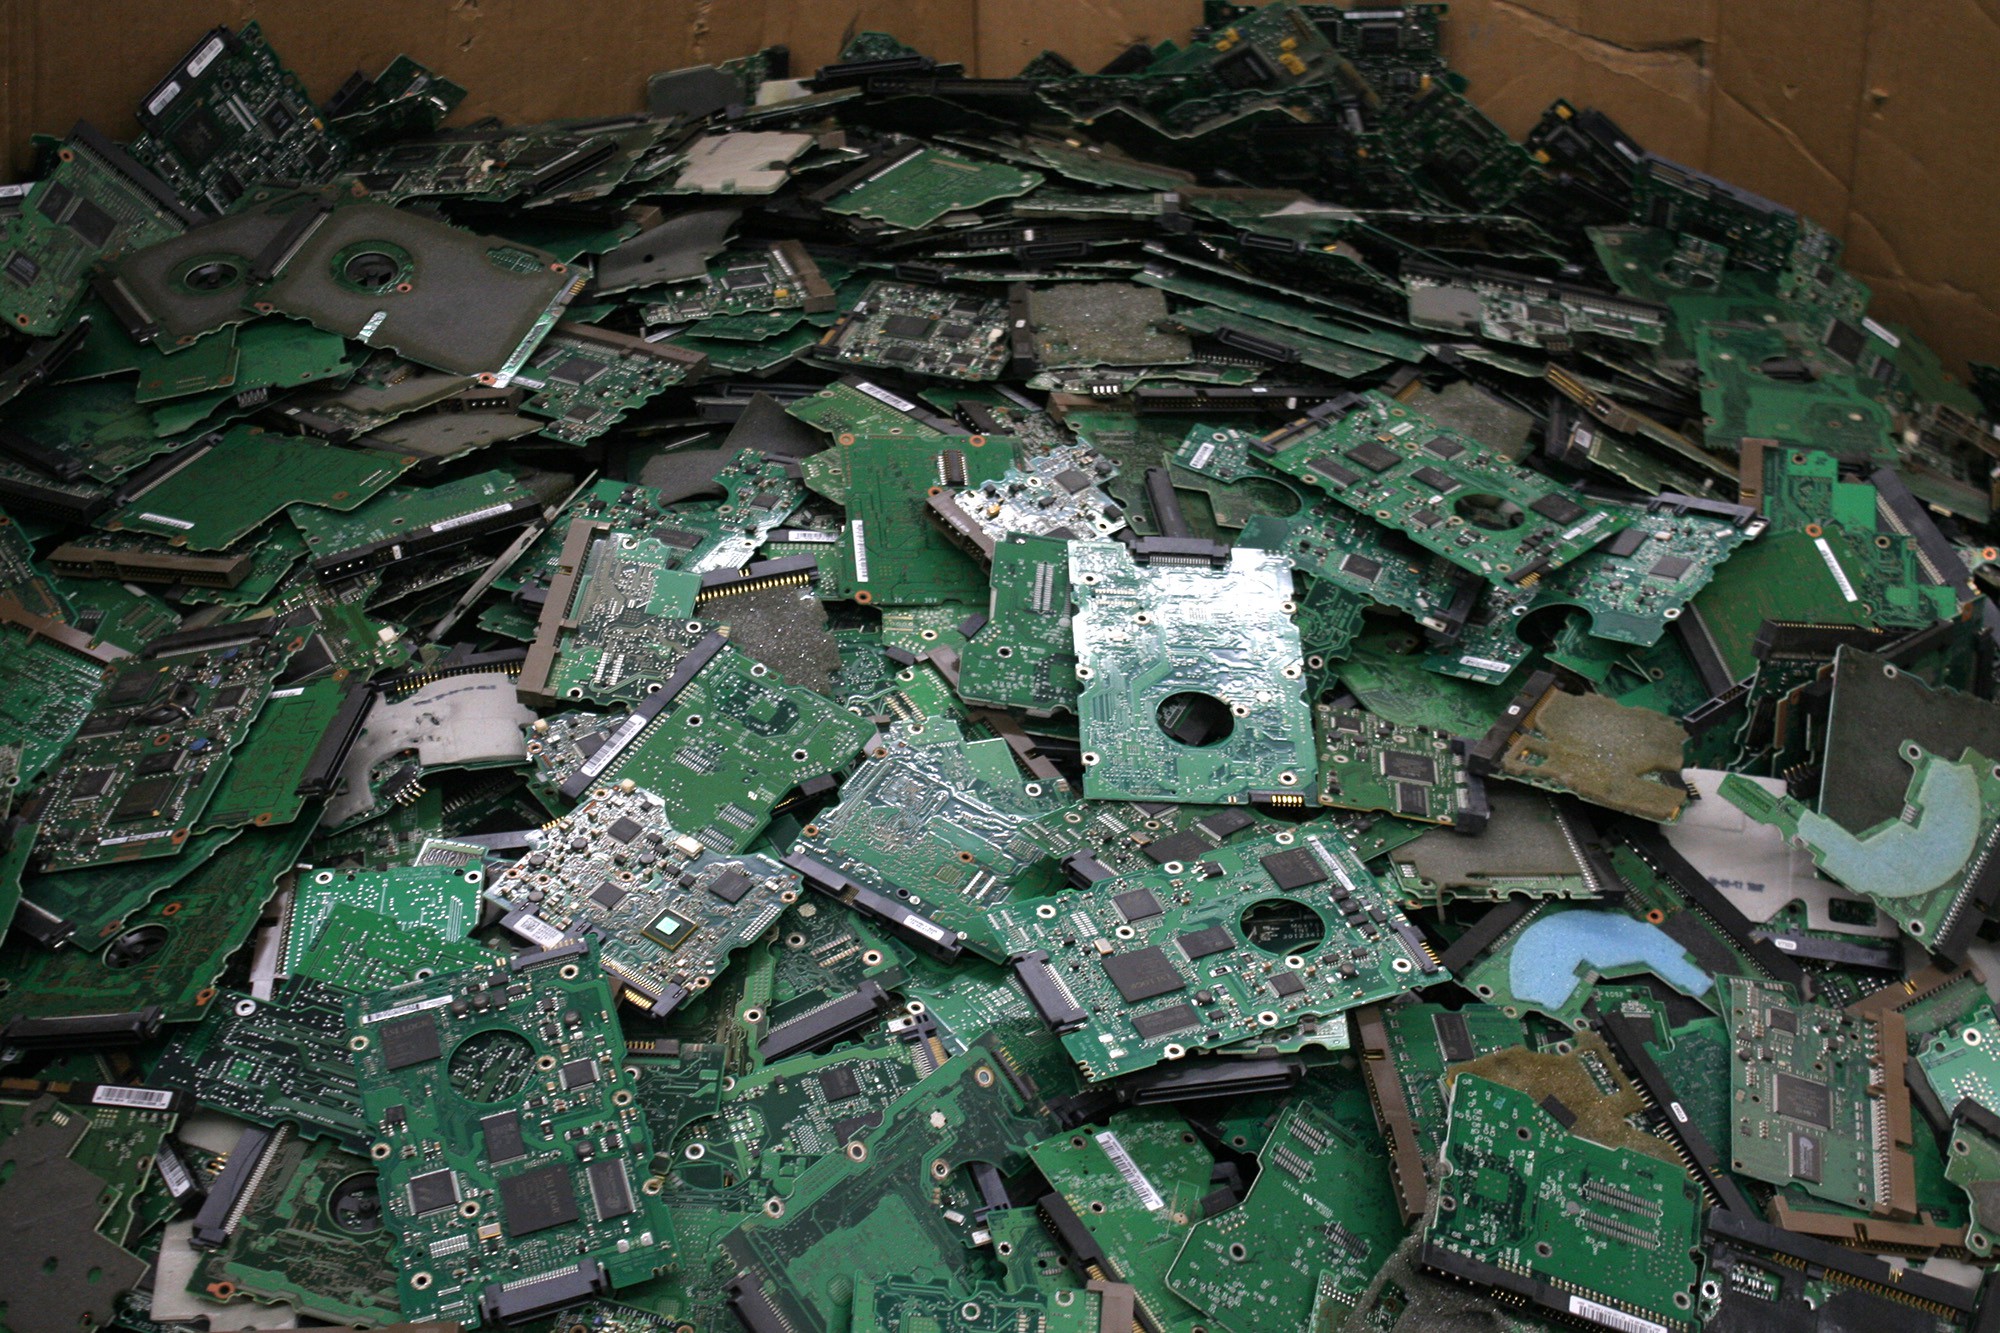 No state law on e-waste, but agency encouraging recycling, proper ...